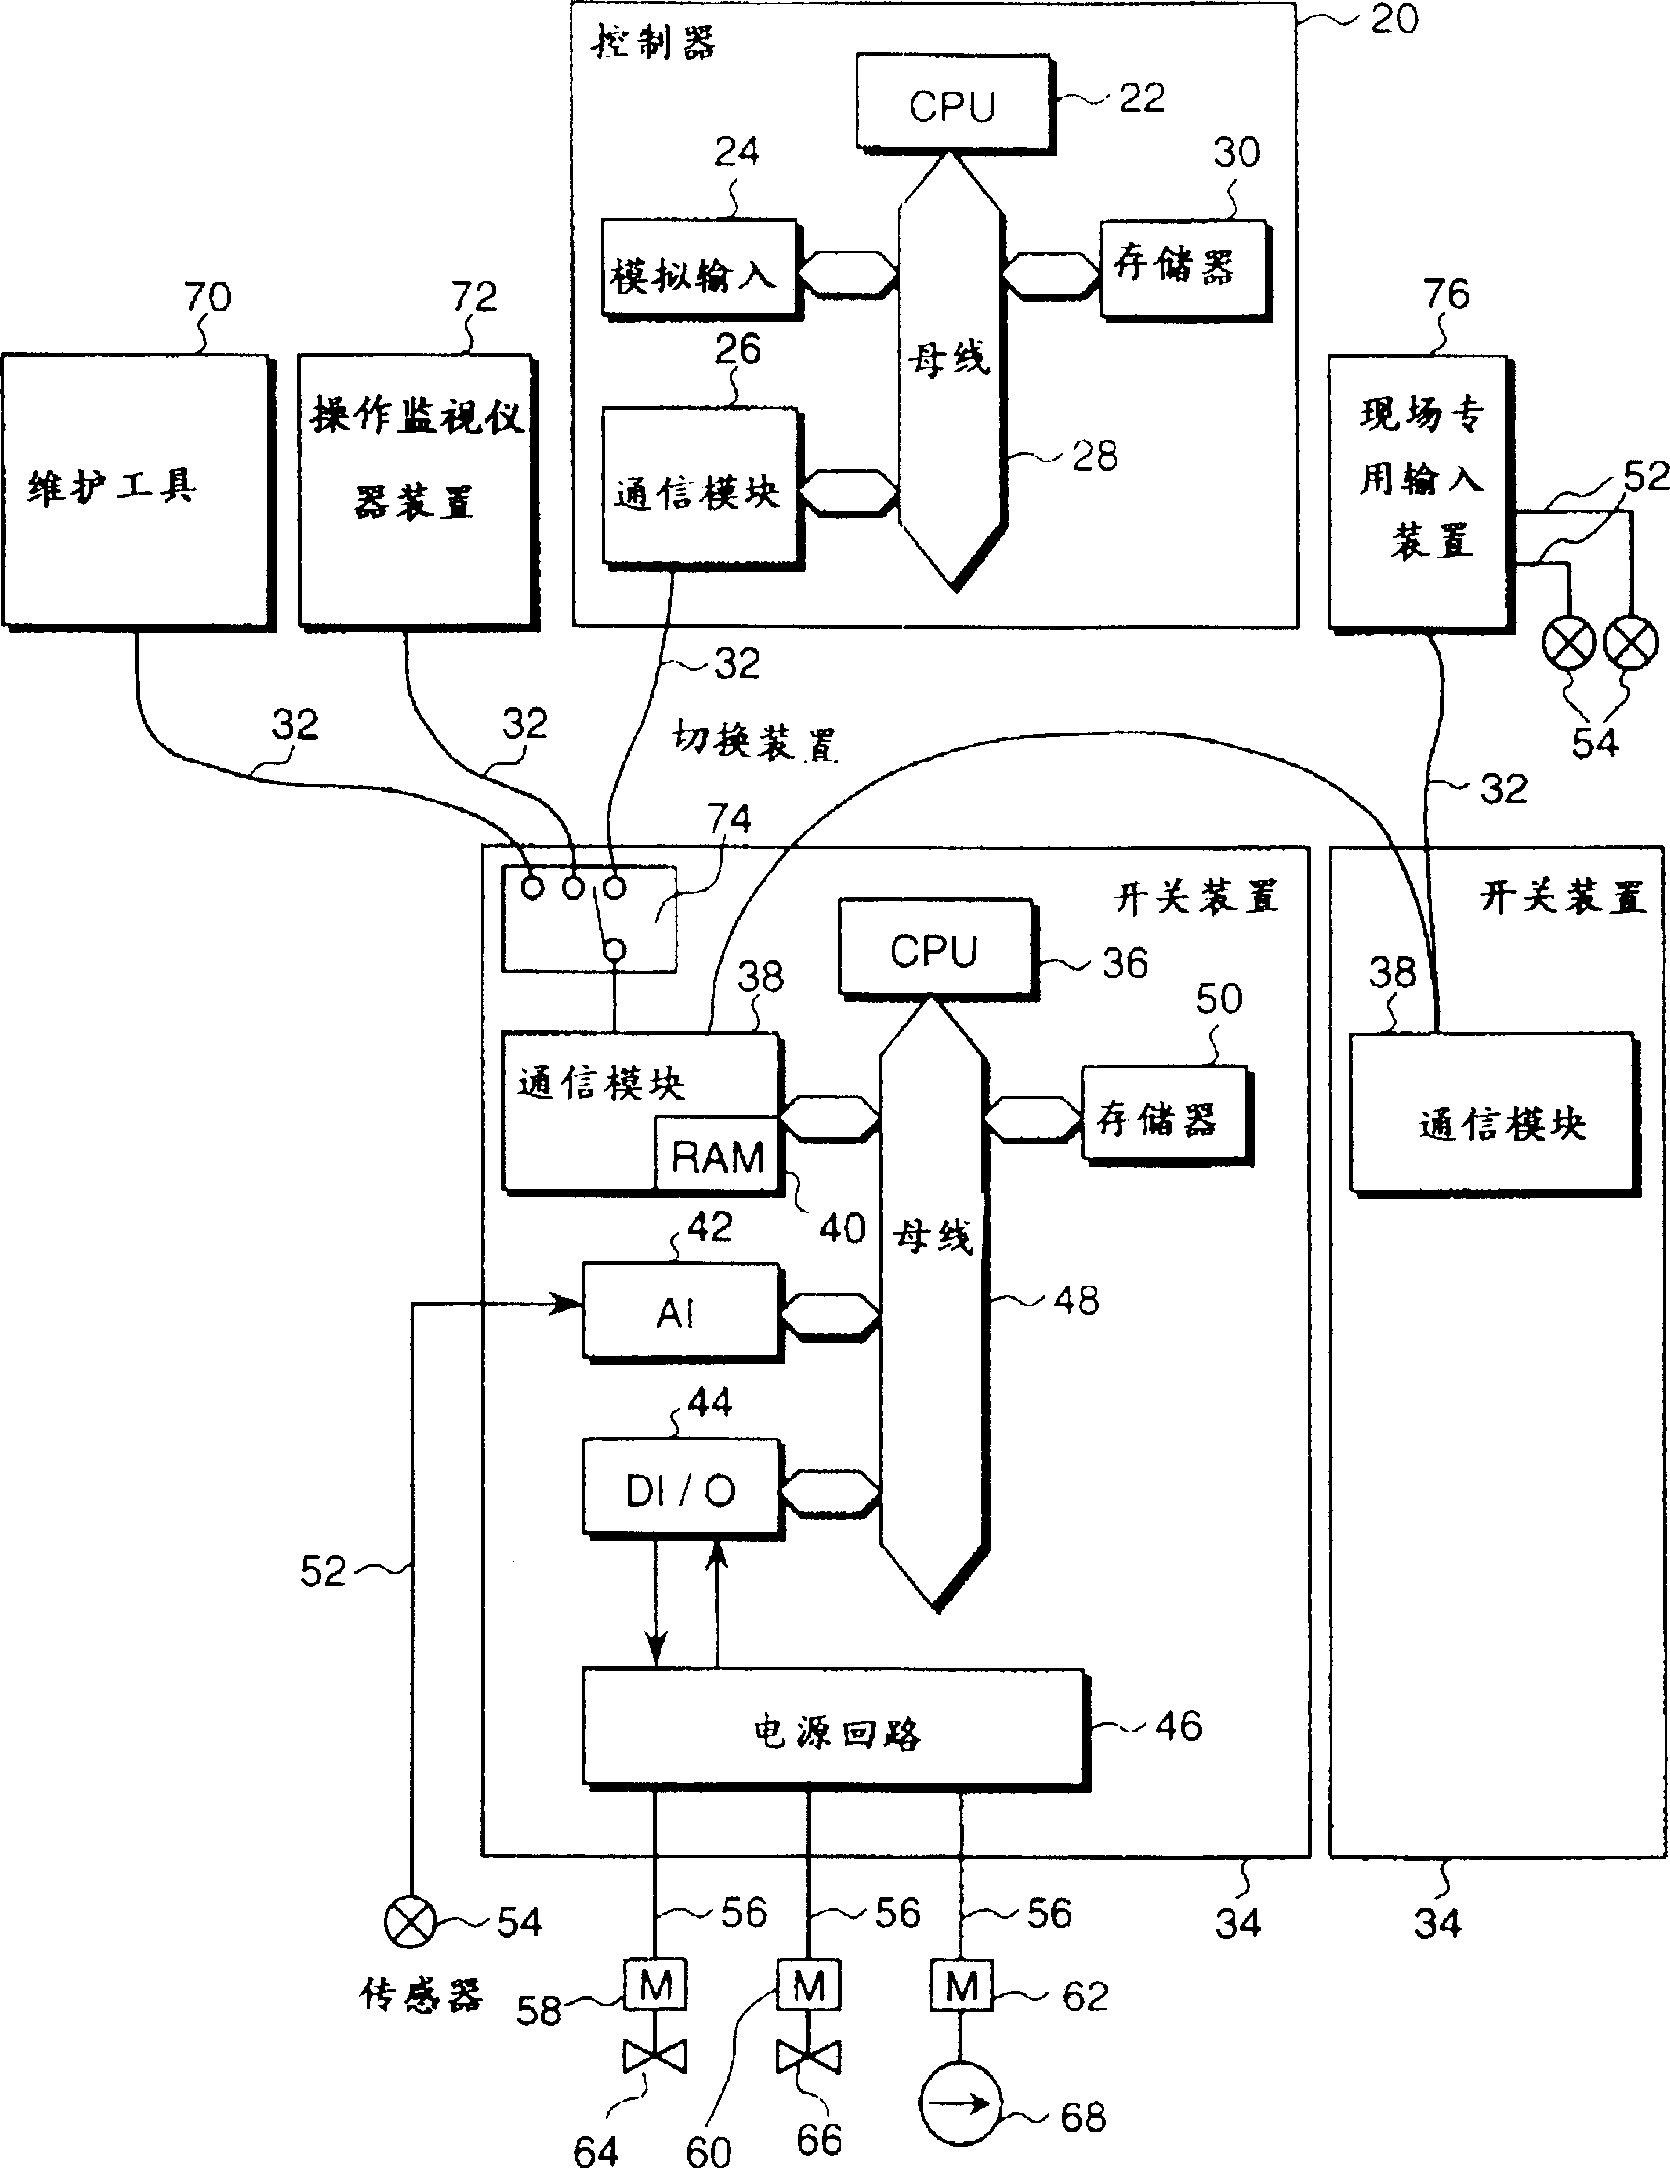 Distribution panel switch gear and monitoring and control system having distribution panel swith gear